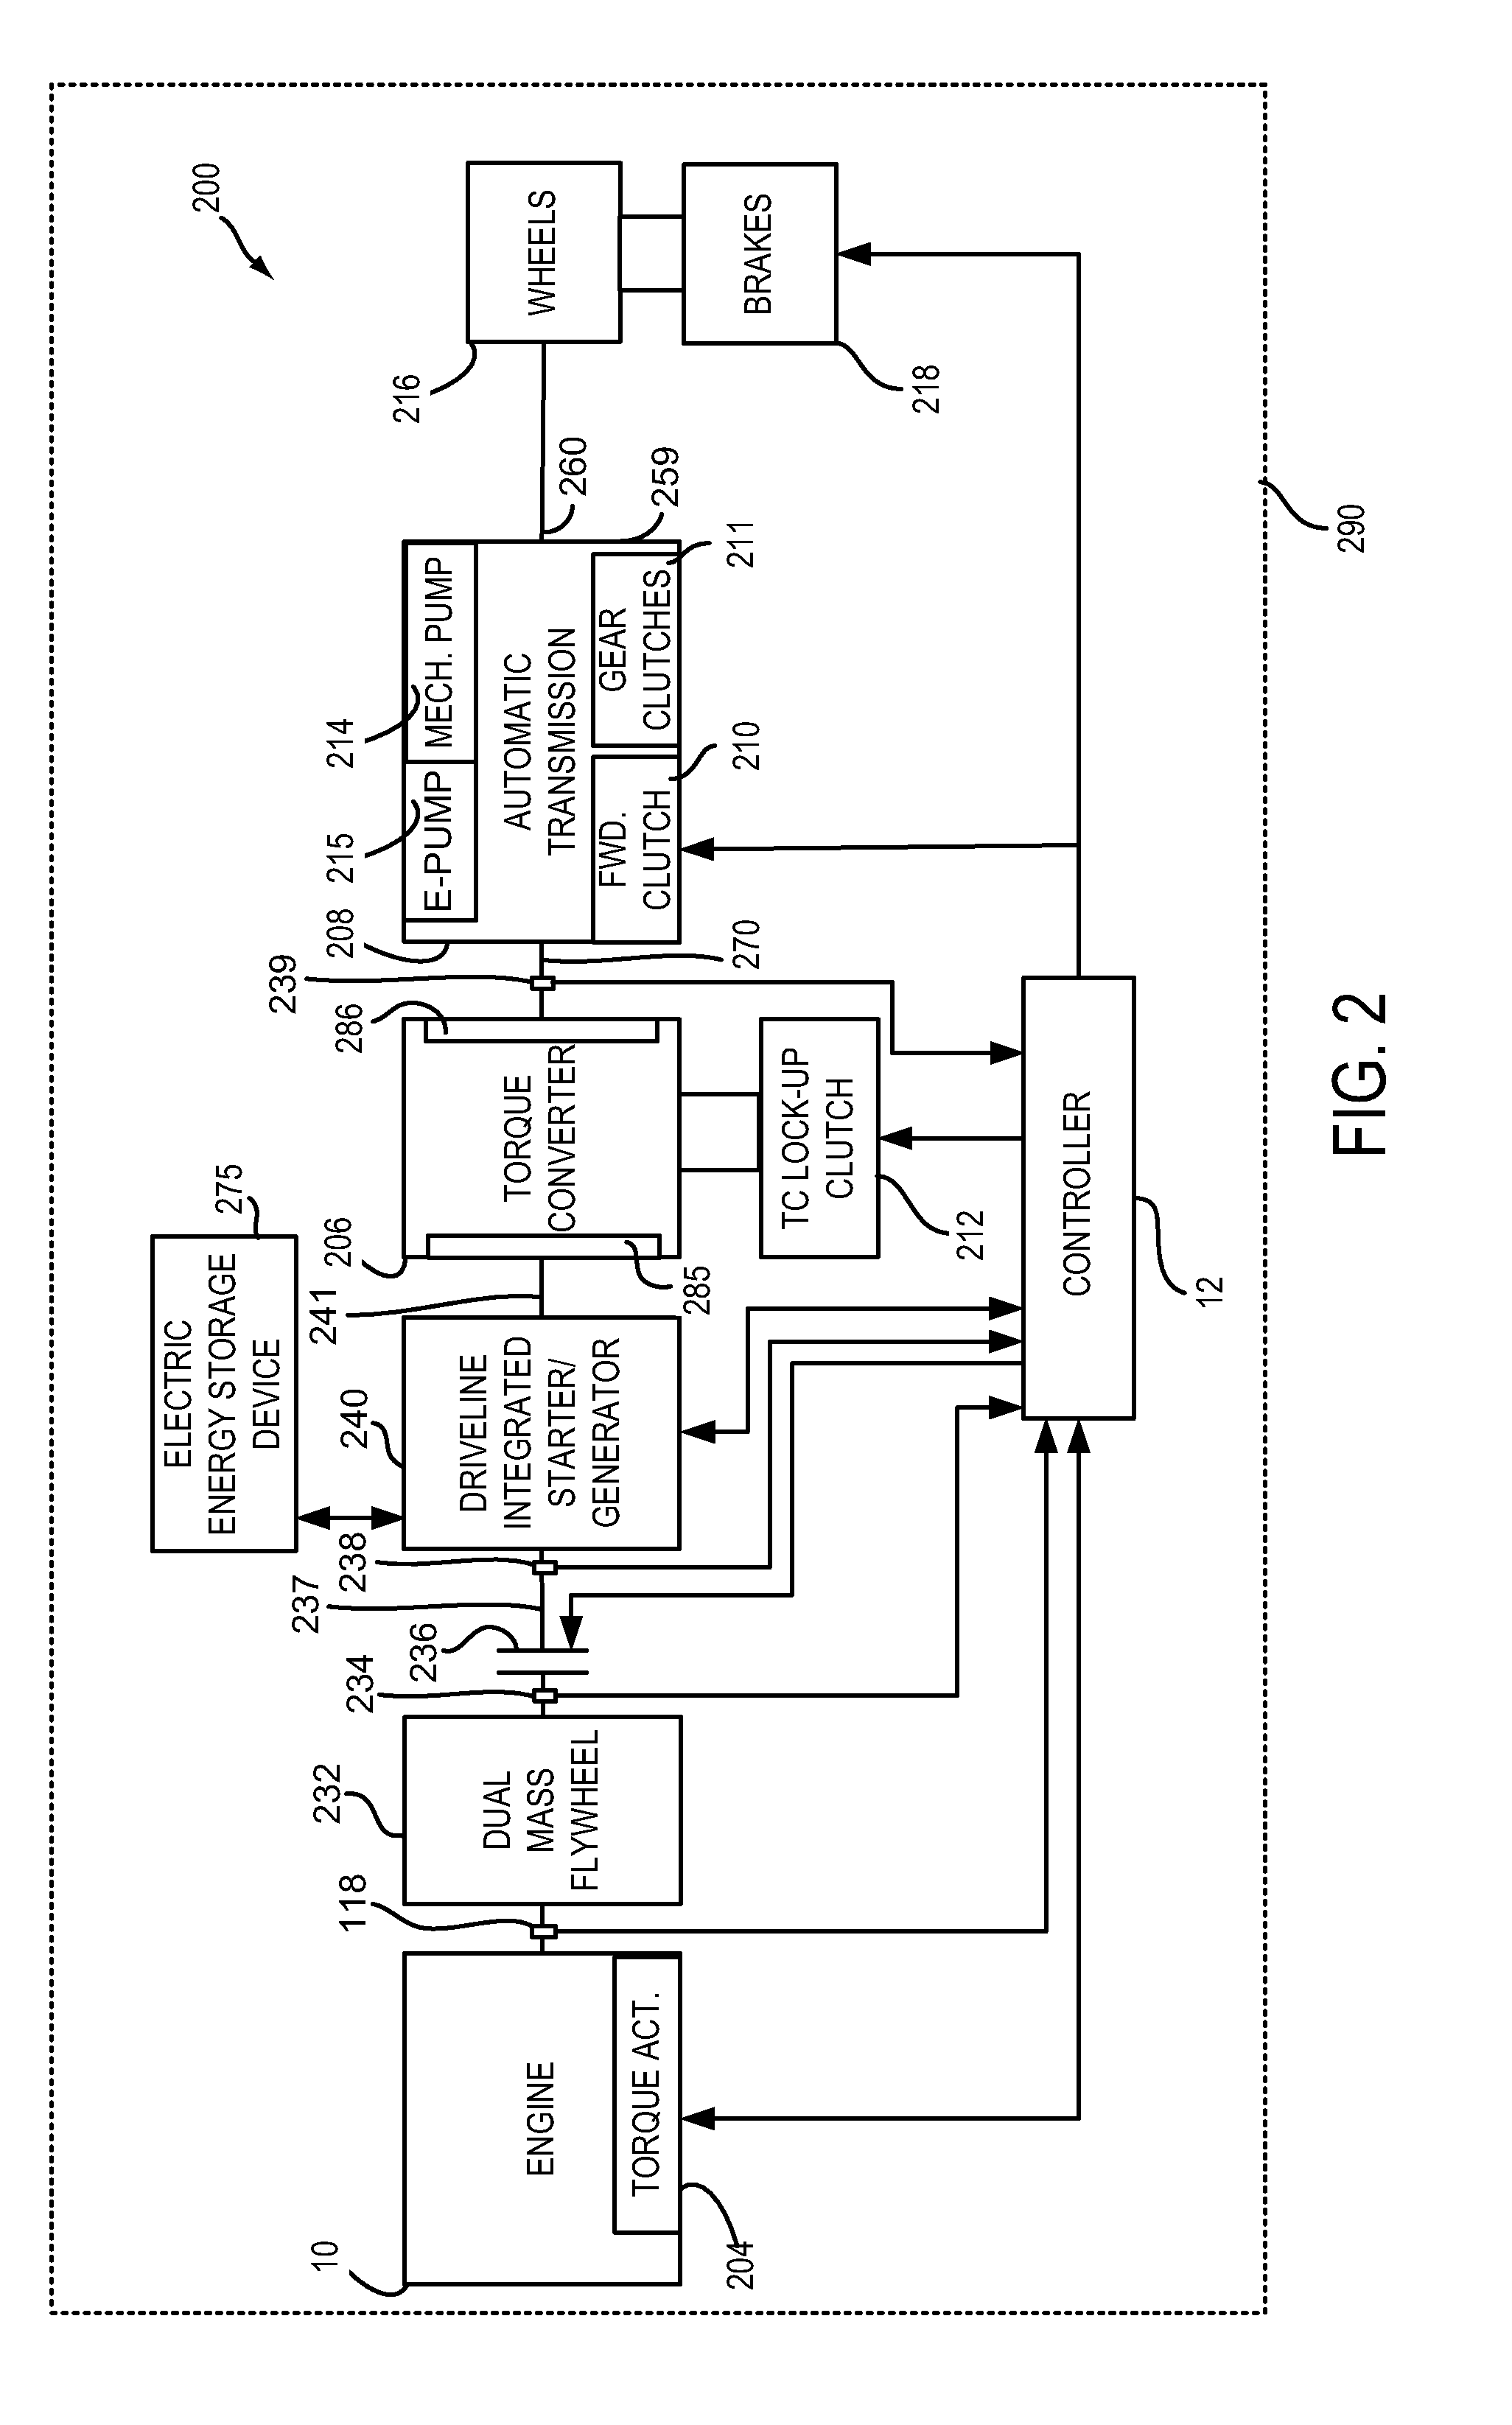 Methods and systems for hybrid vehicle waste heat recovery